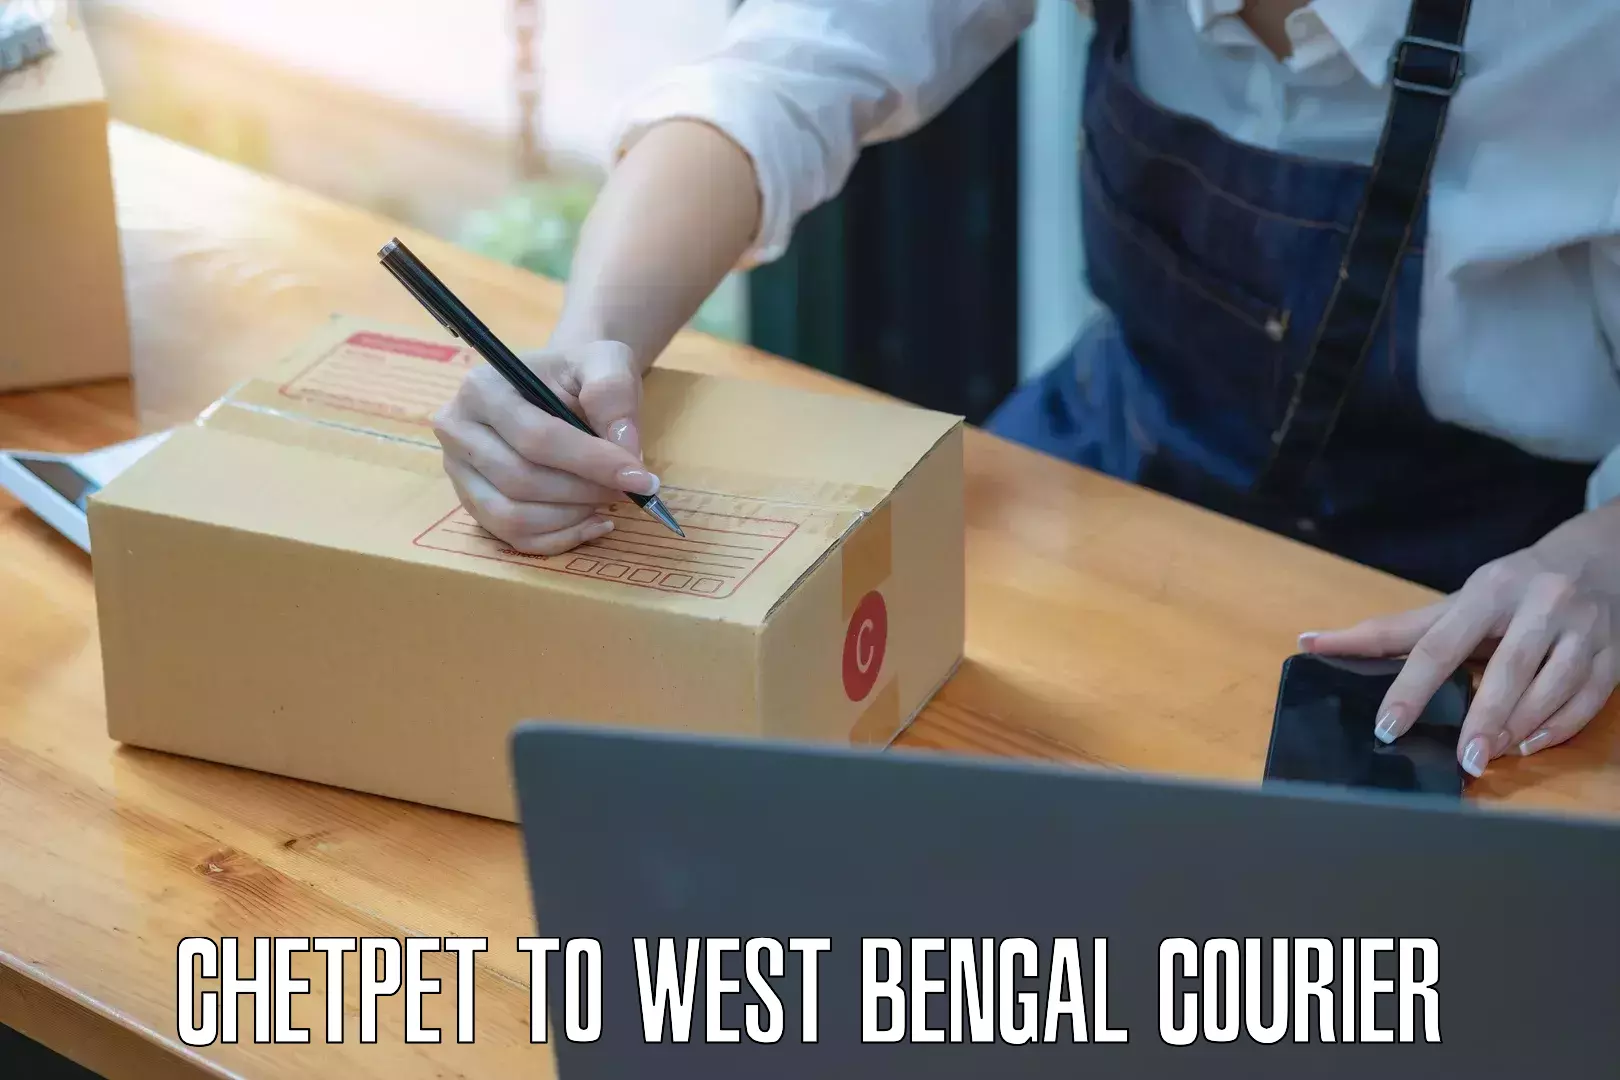 Customizable shipping options in Chetpet to West Bengal